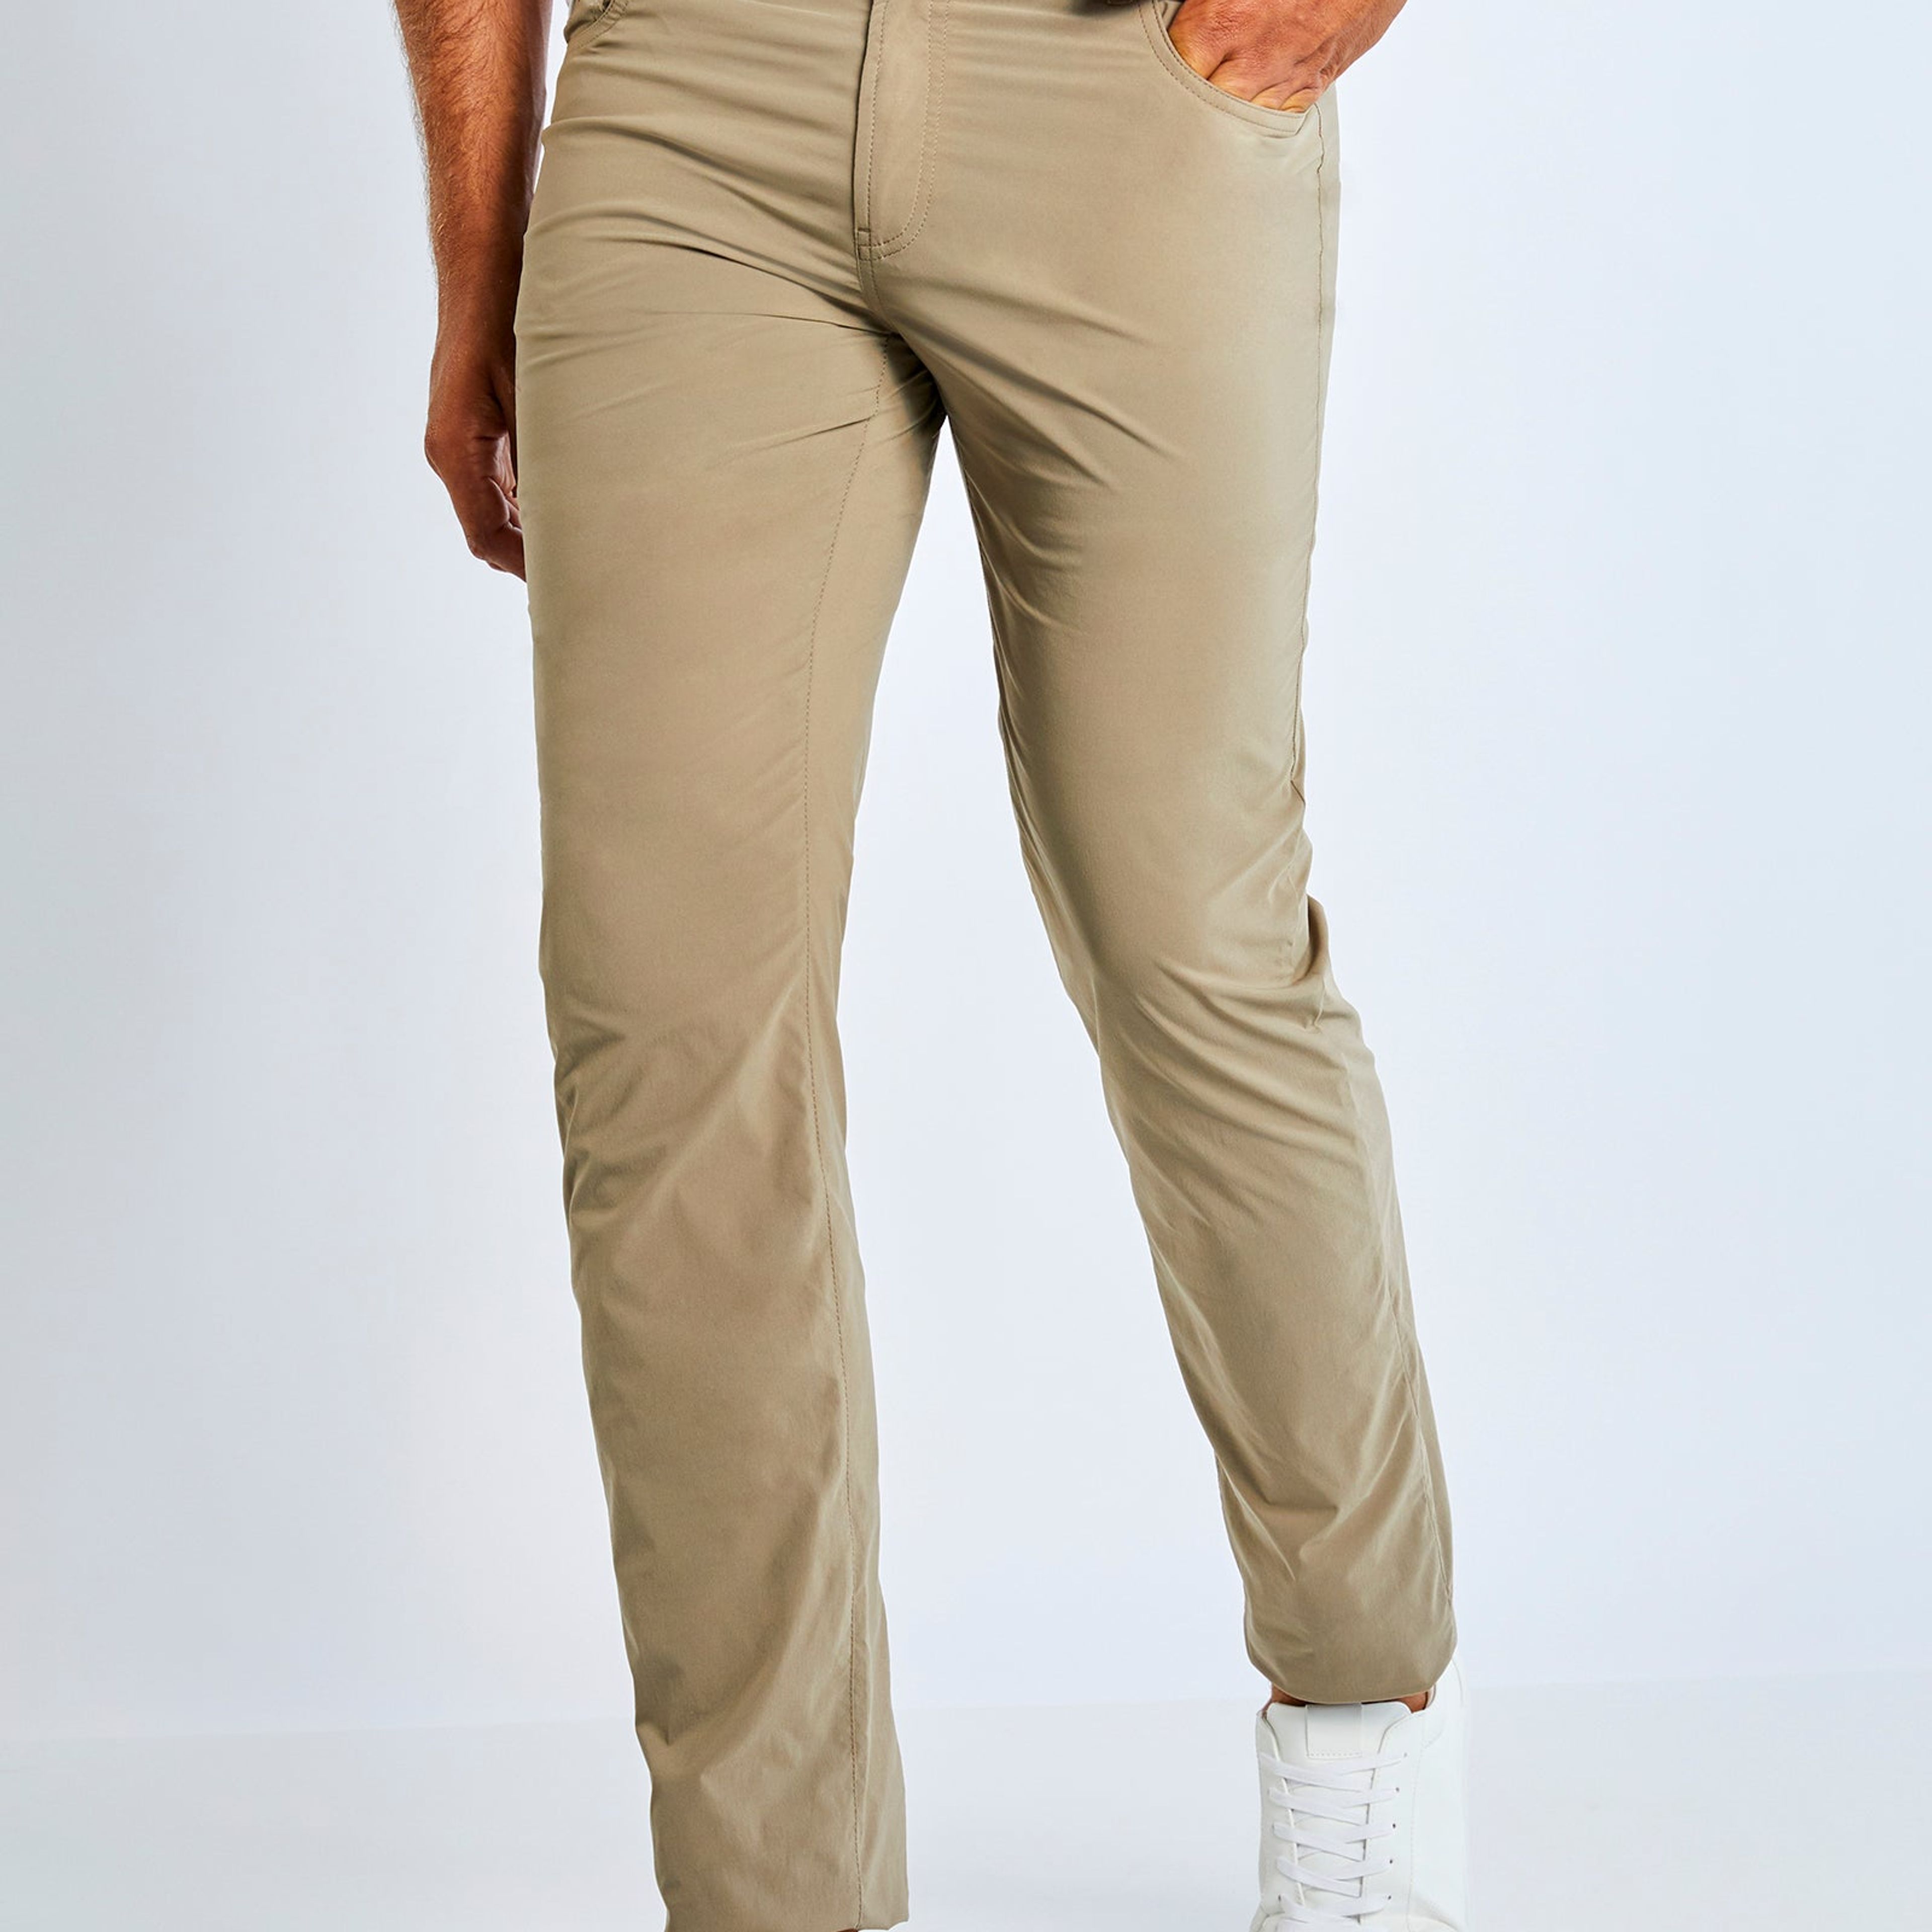 Alessio Five Pocket Jean Style Pant